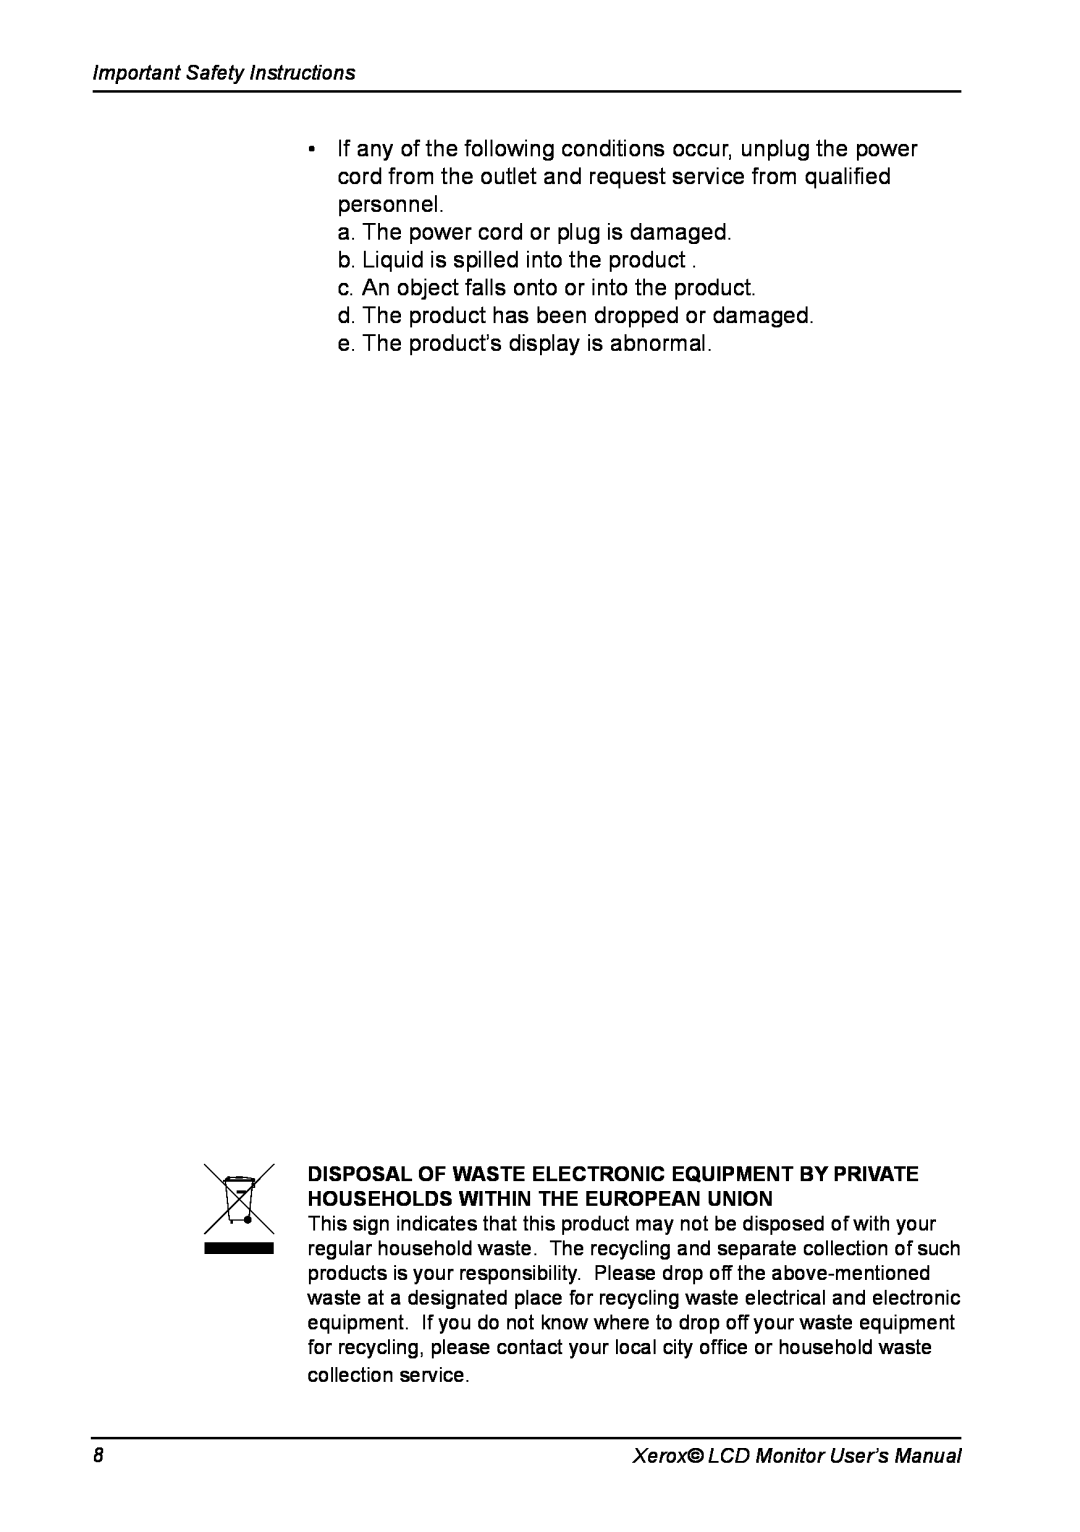 Xerox XR6 Series manual a.The power cord or plug is damaged 